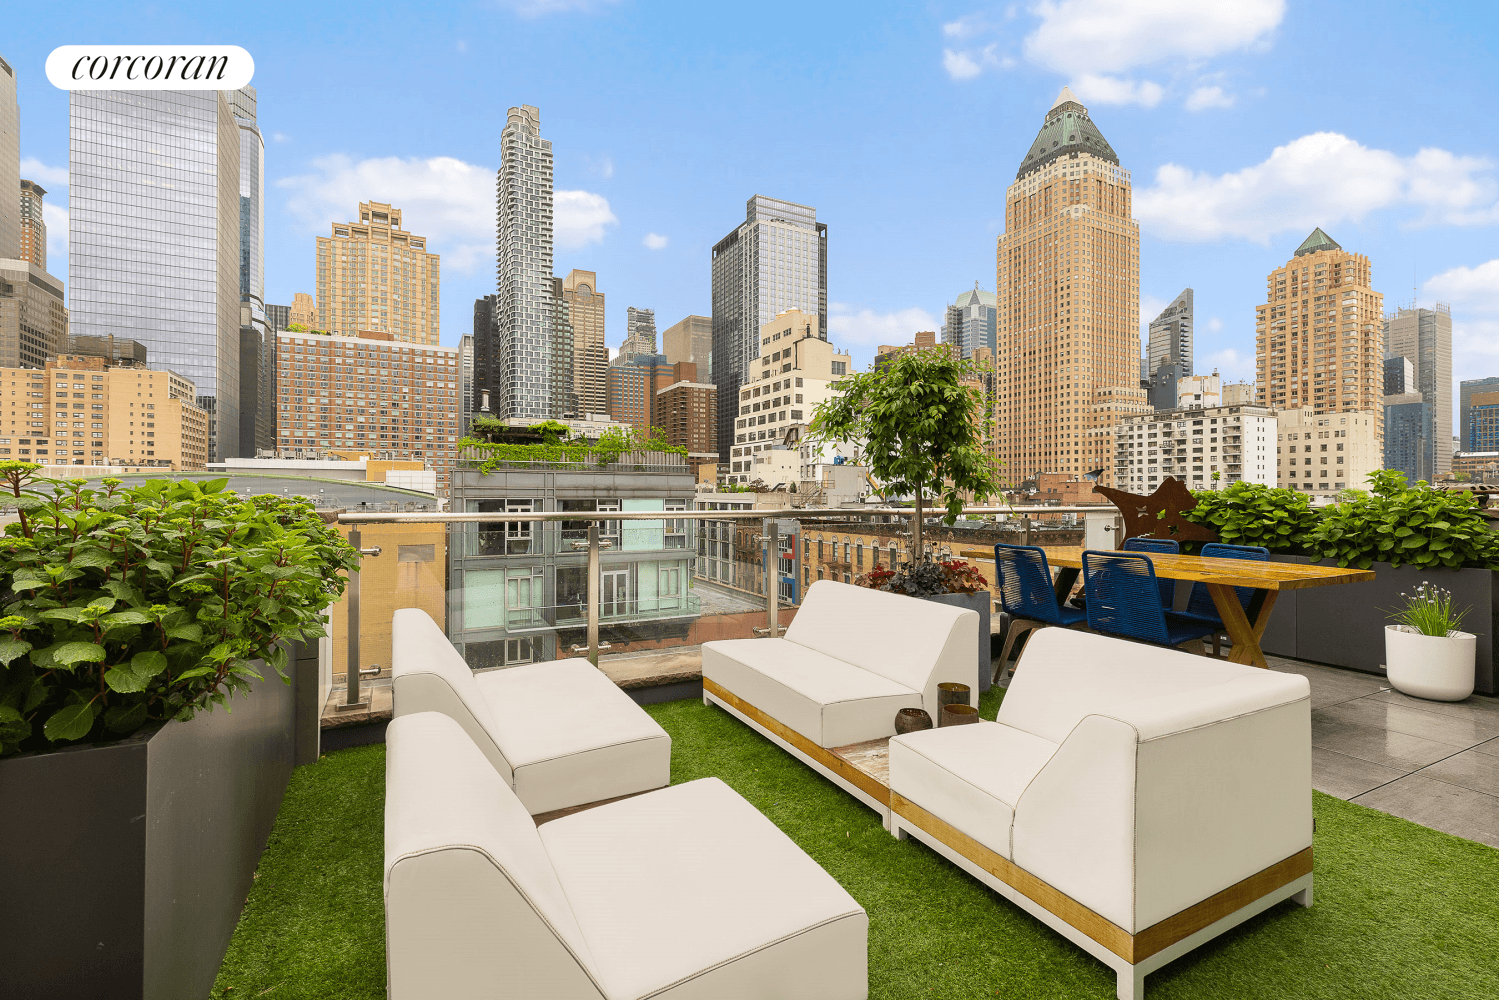 Prepare to be wowed ! There is nothing on the rental market like this private penthouse paradise perched atop a boutique new development condo in prime Hell's Kitchen.